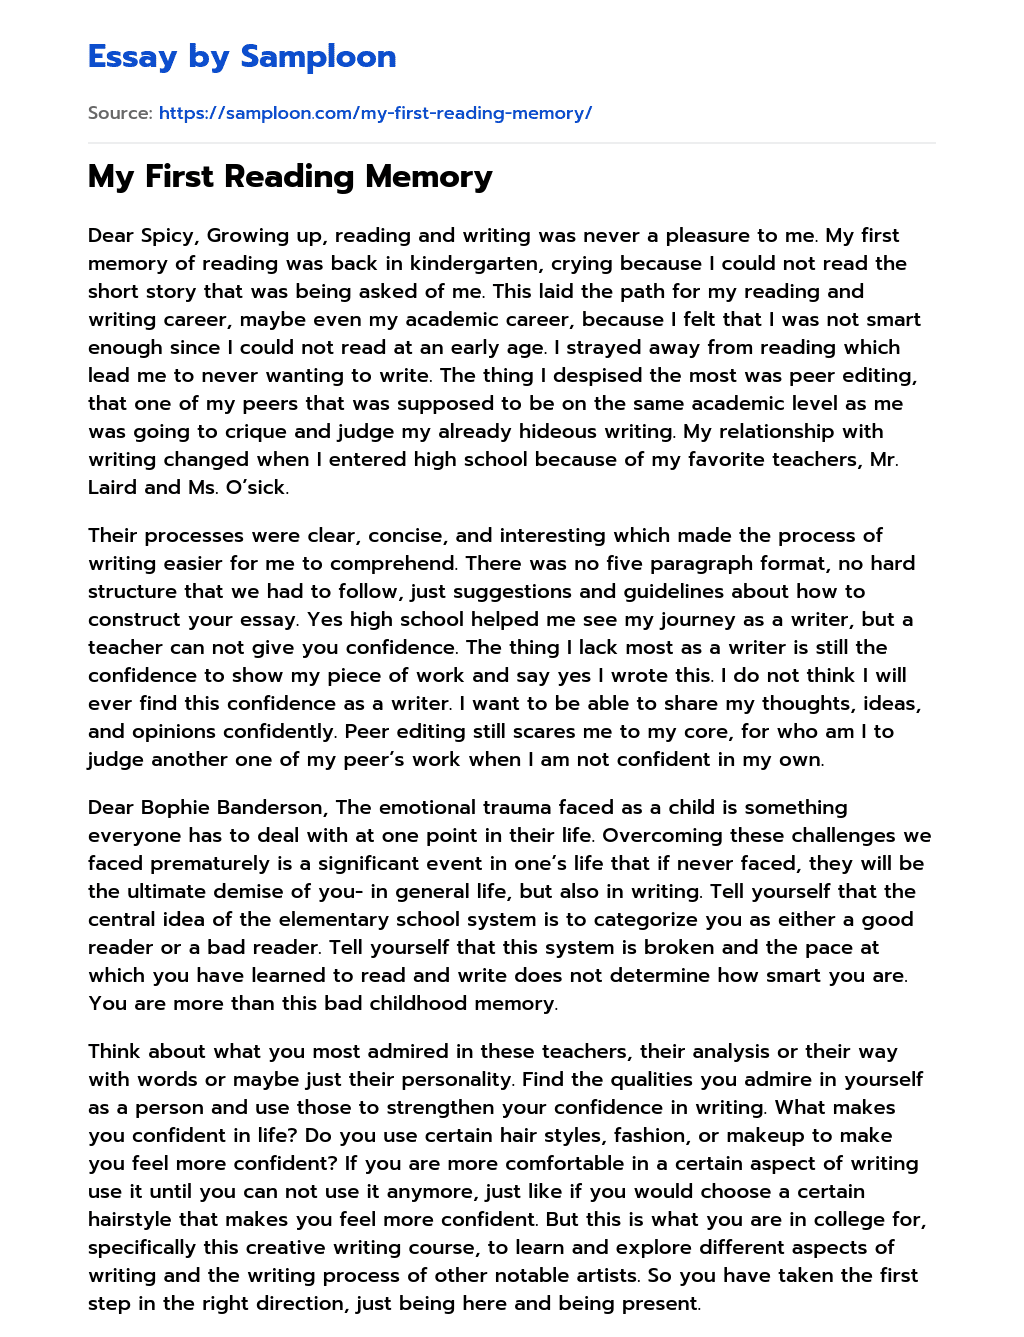 My First Reading Memory essay